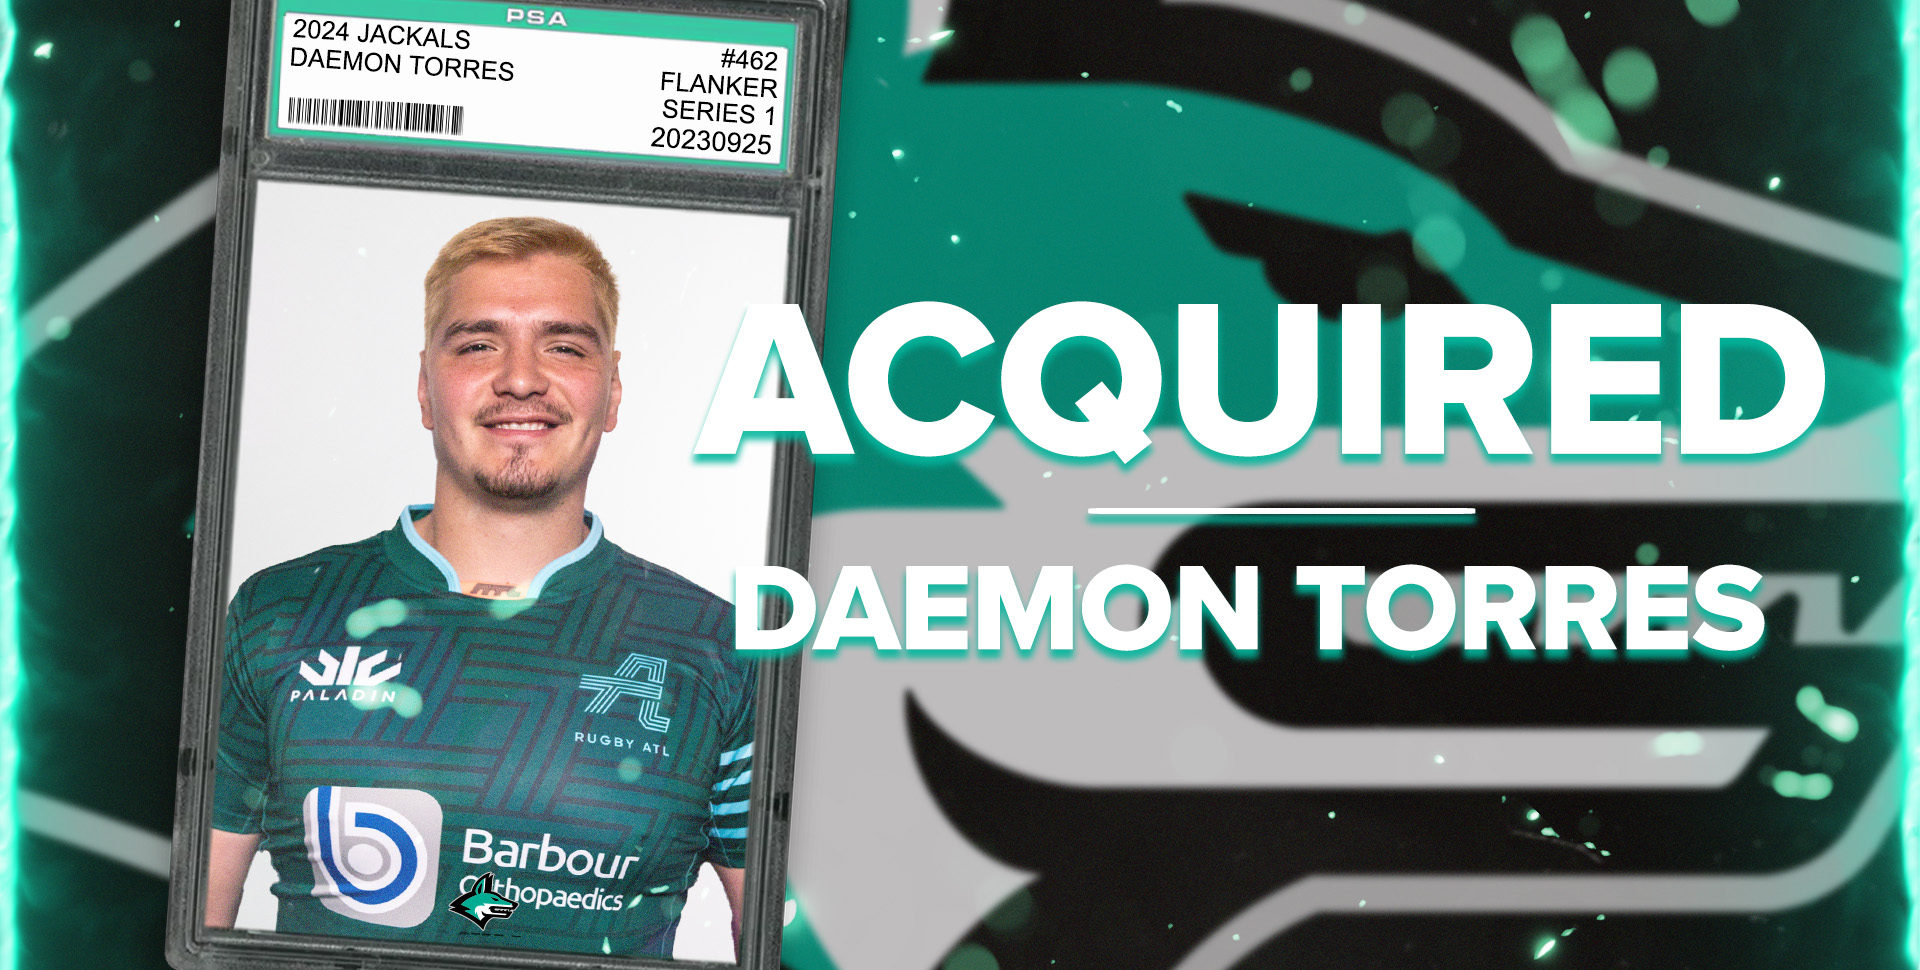 The Dallas Jackals Have Acquired, Flanker, Daemon Torres